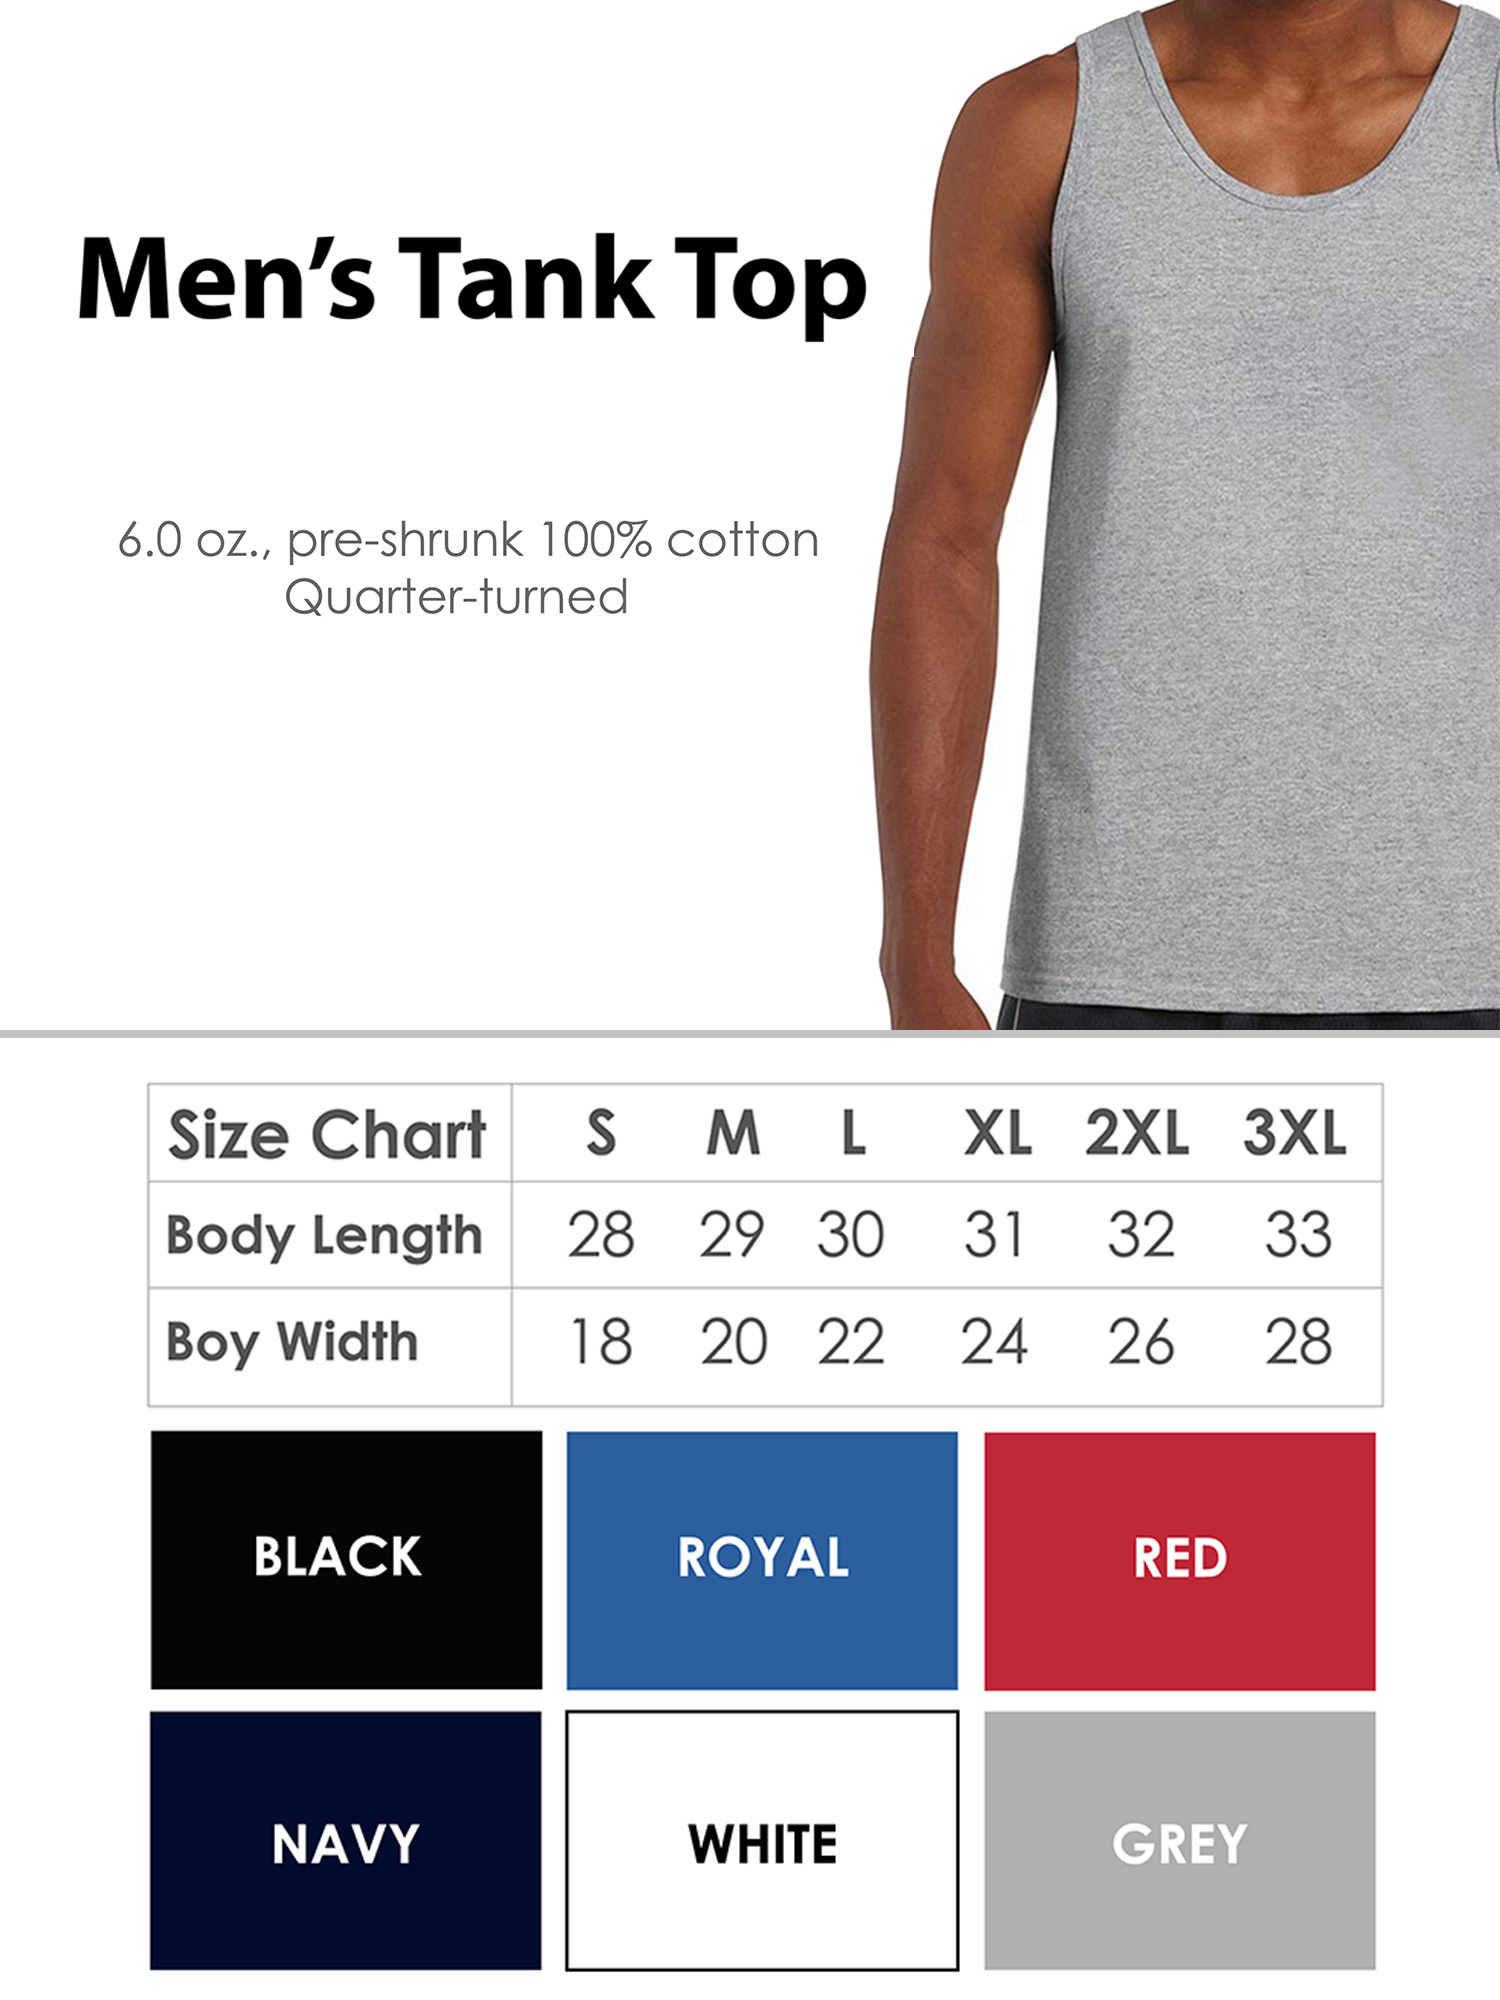 Awkward Styles Palms Shirt Vacay Vibes Clothing Collection for Men Beach Tank Top for Men Vacay Vibes Shirts Summer Vibes Clothes for Men Summer Tank Top Beach Tshirt for Men Beach Gifts - image 4 of 4